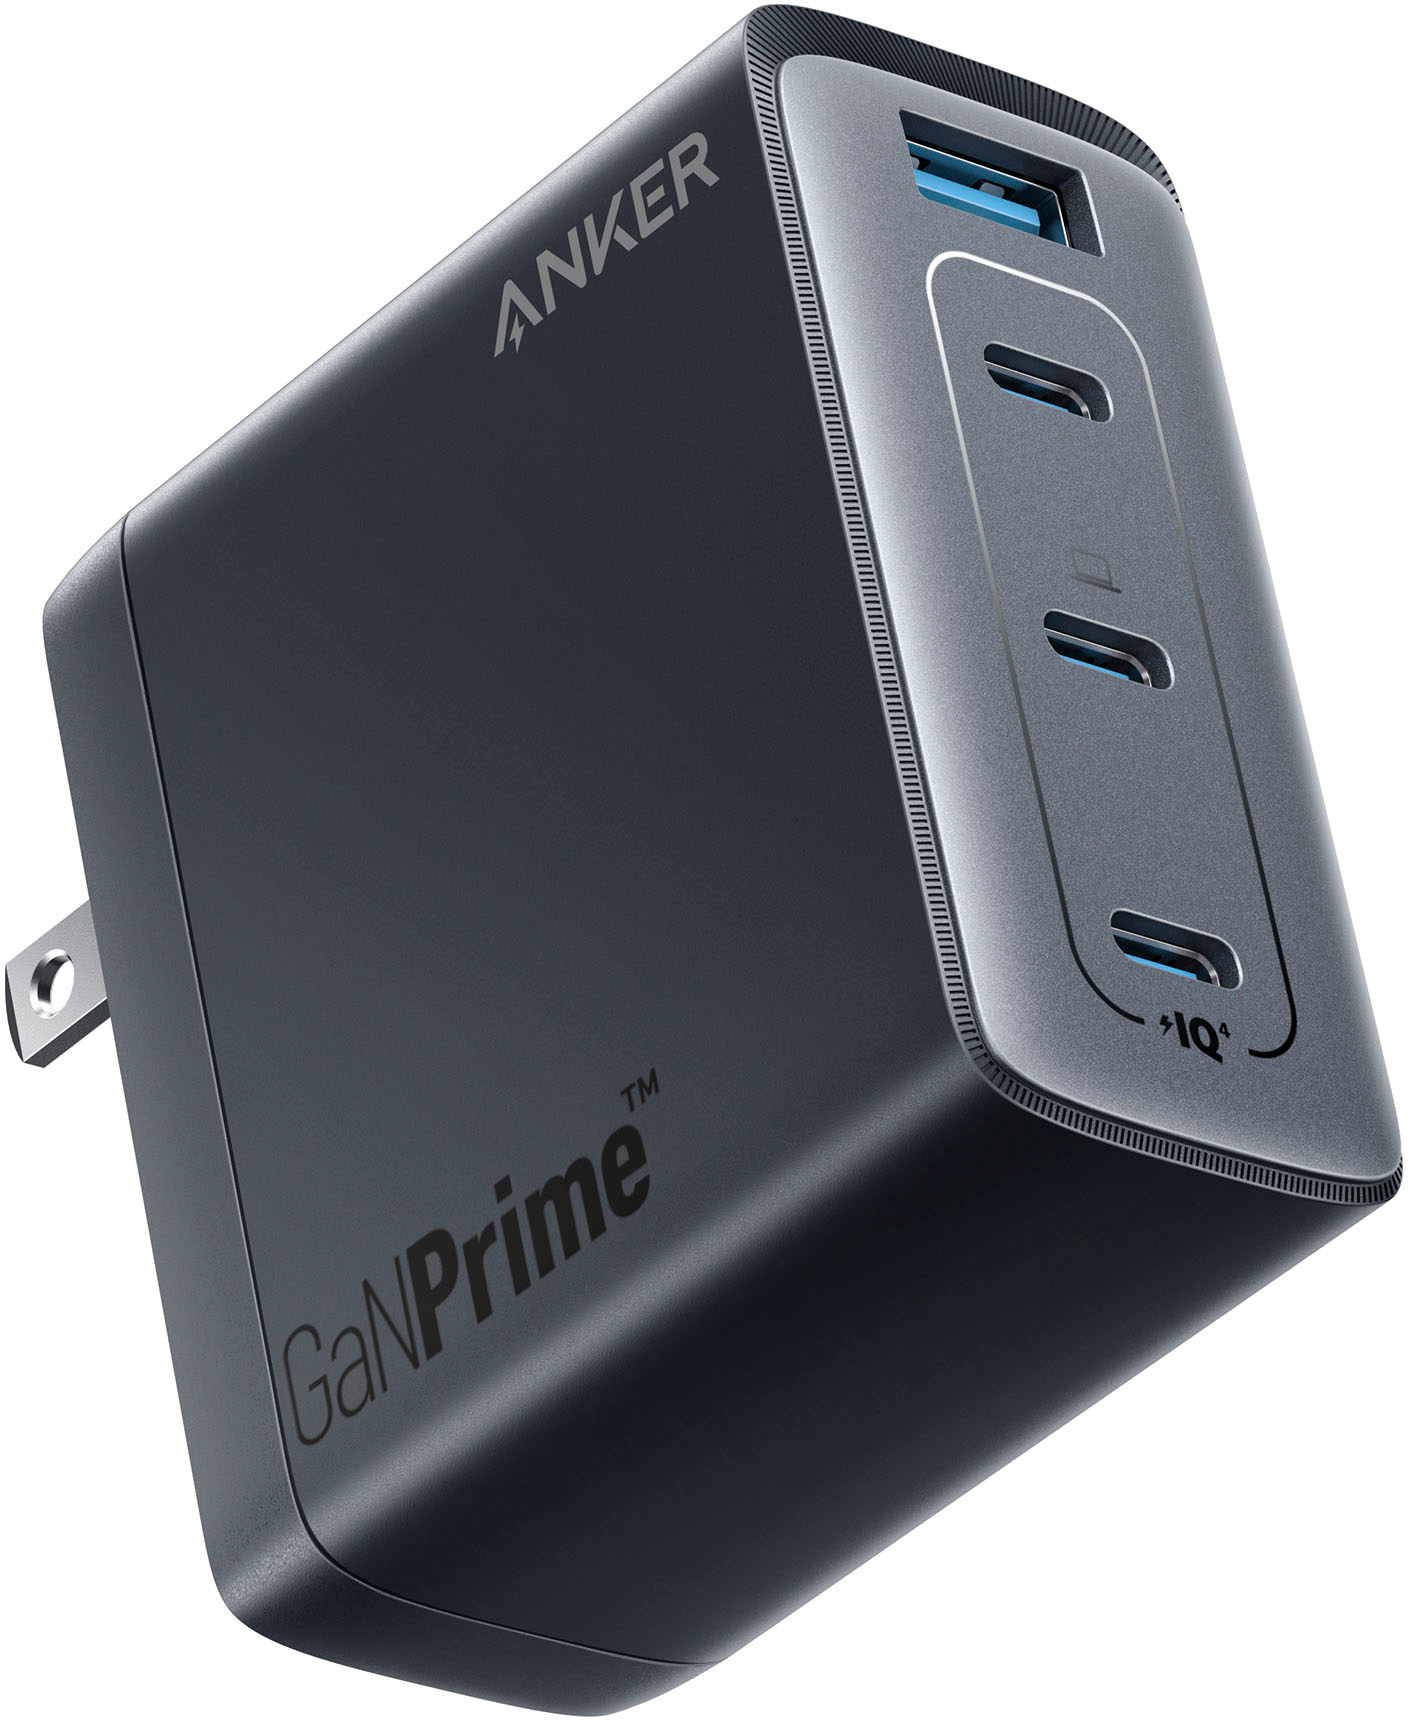 Anker 733 10k mAh 2-in-1 Portable Battery with GaN and 65W Fast Wall  charger for iPhone, Samsung, Tablets, and Laptops Black A1651111-1 - Best  Buy